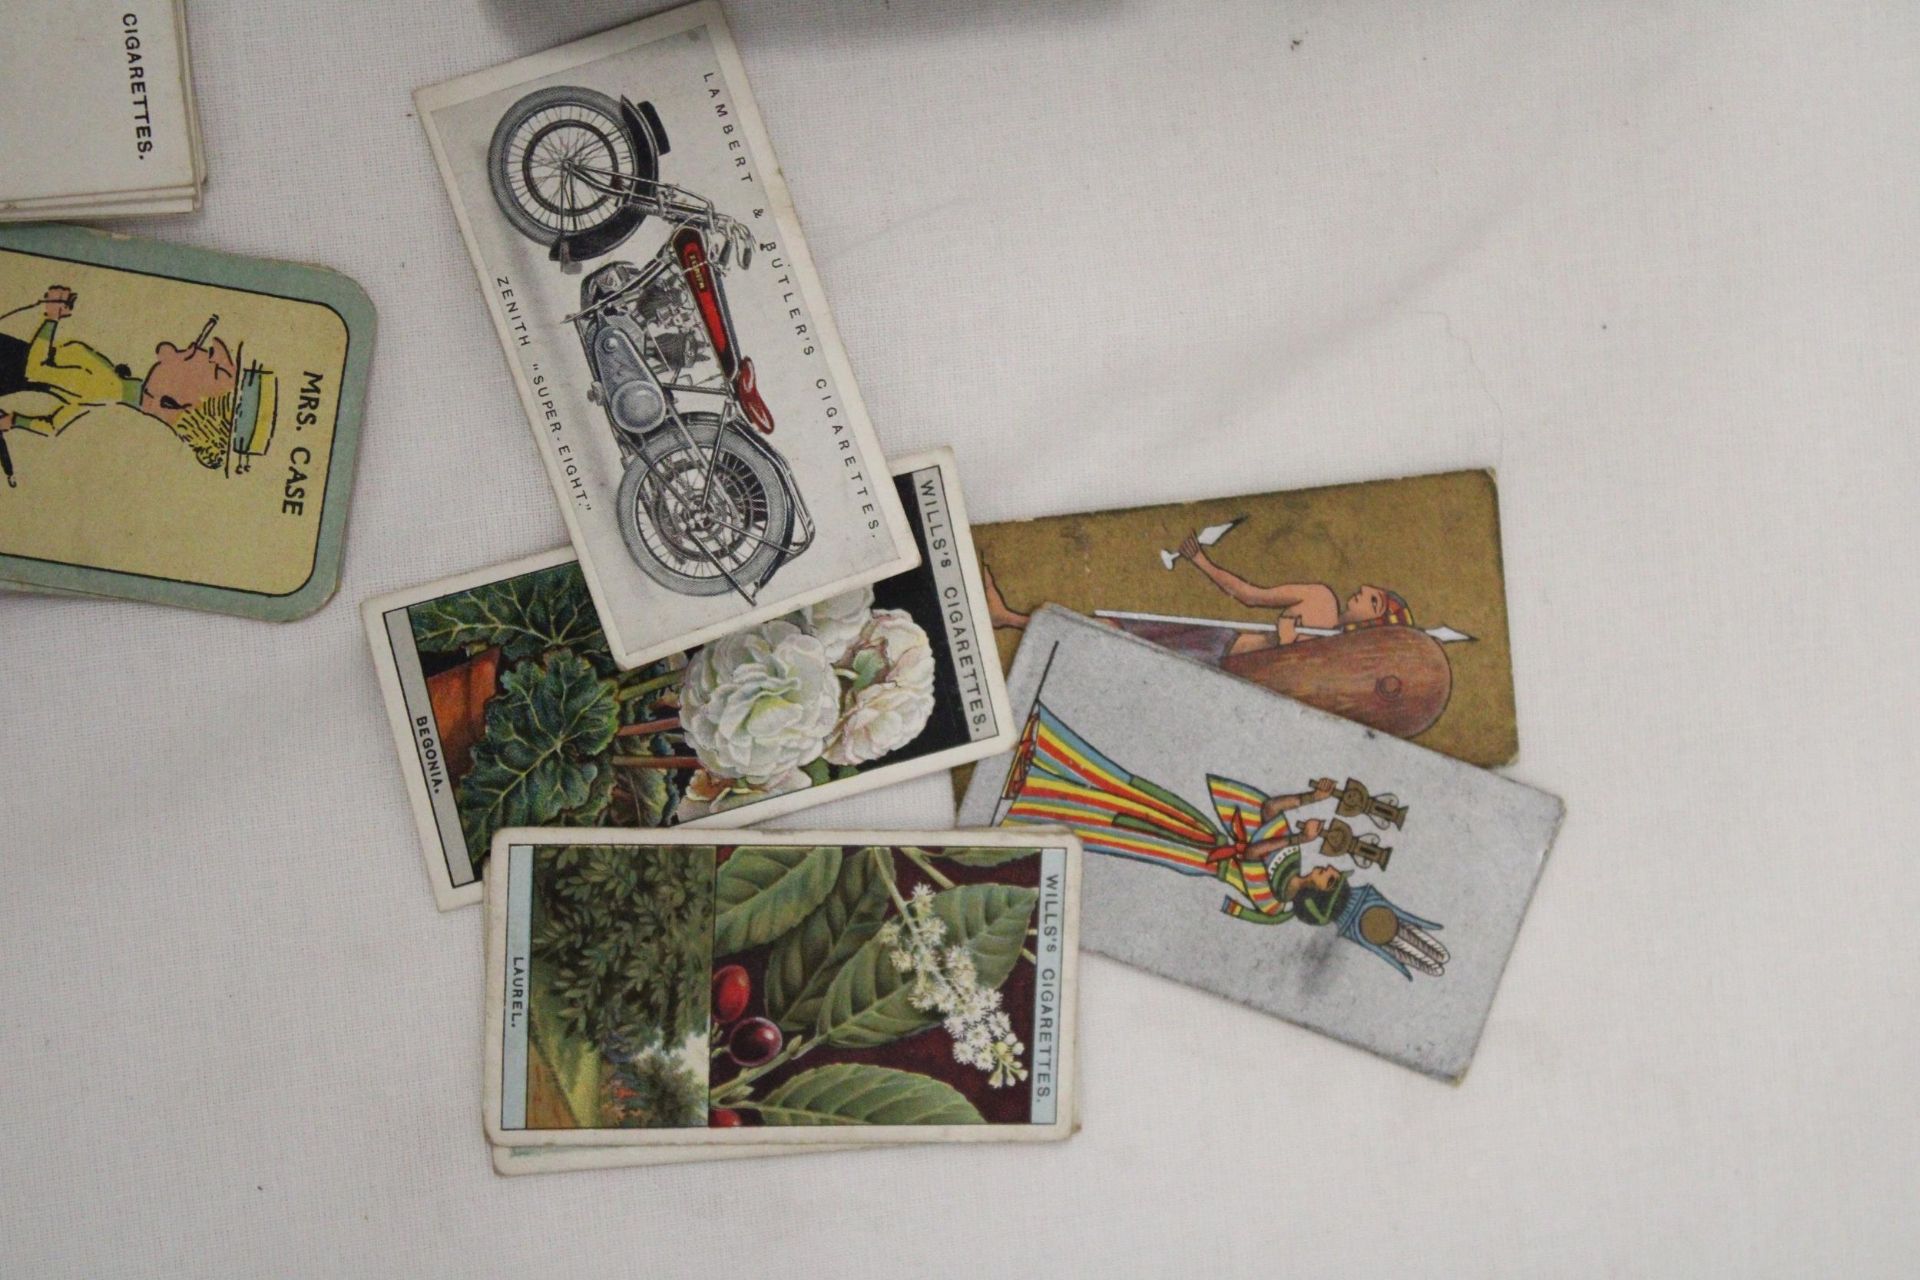 A VINTAGE CIGARETTE TIN CONTAINING CIGARETTE CARDS - Image 4 of 5